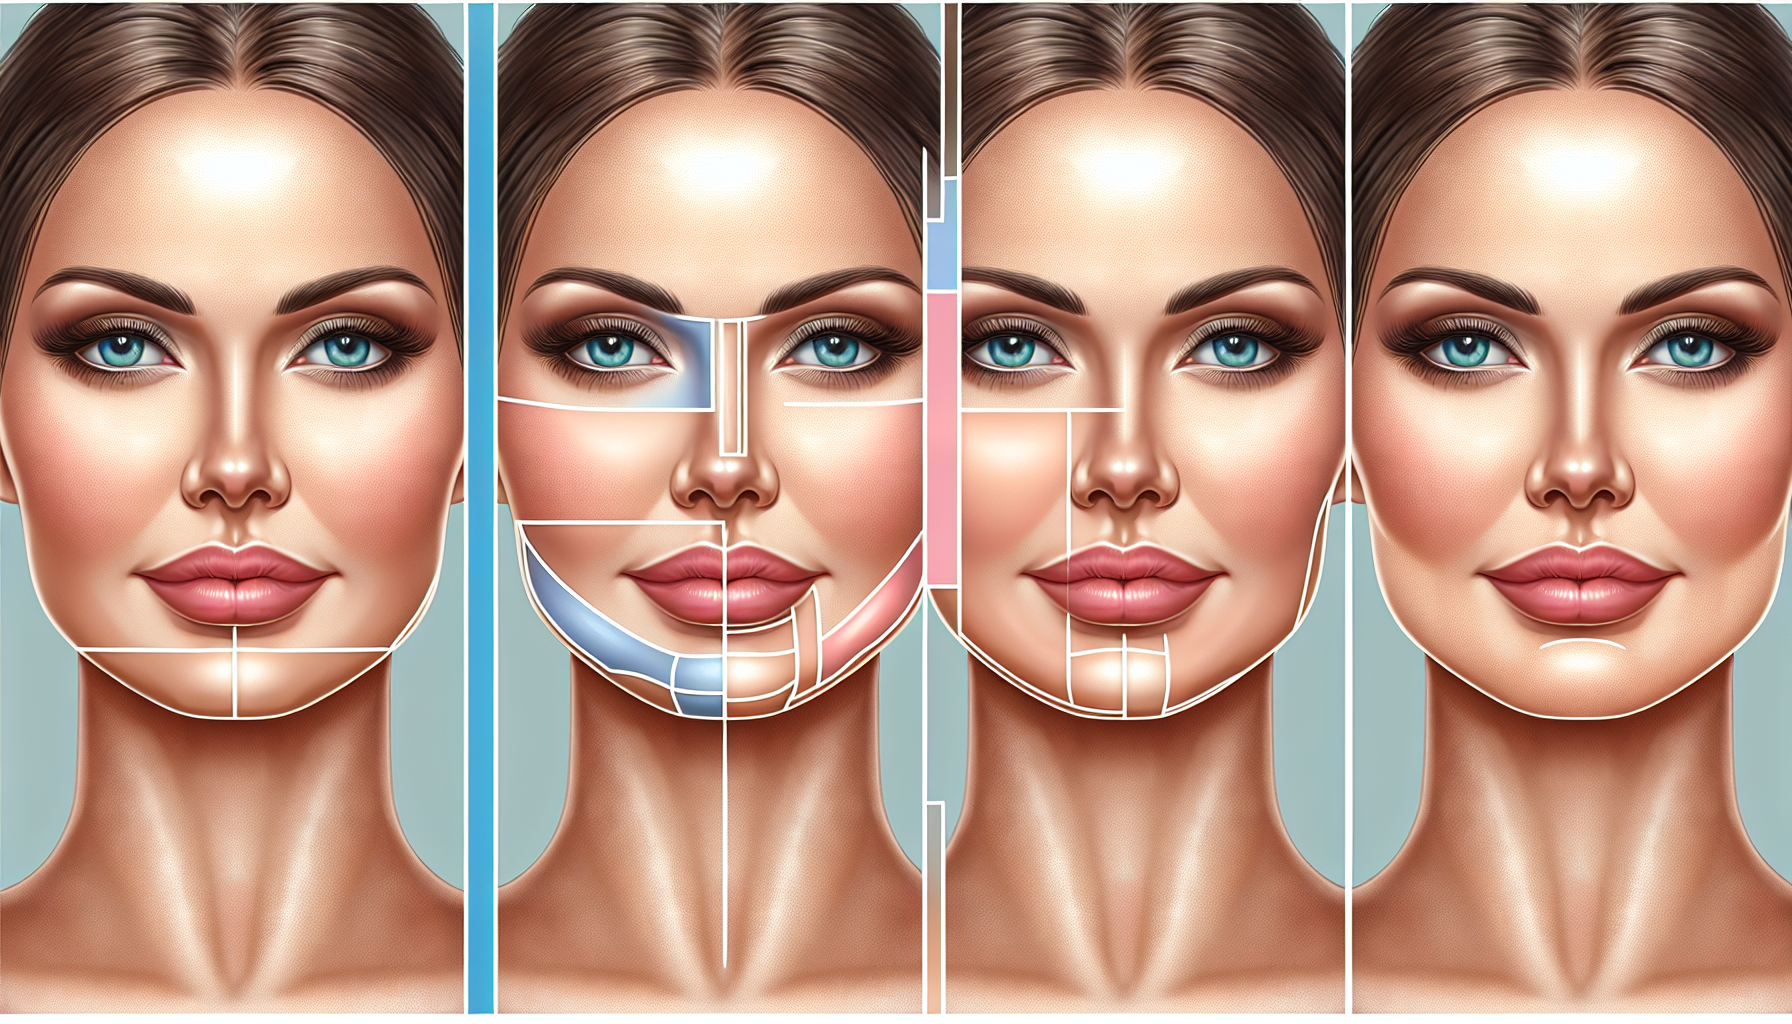 Illustration comparing lipo papada with other chin contouring options